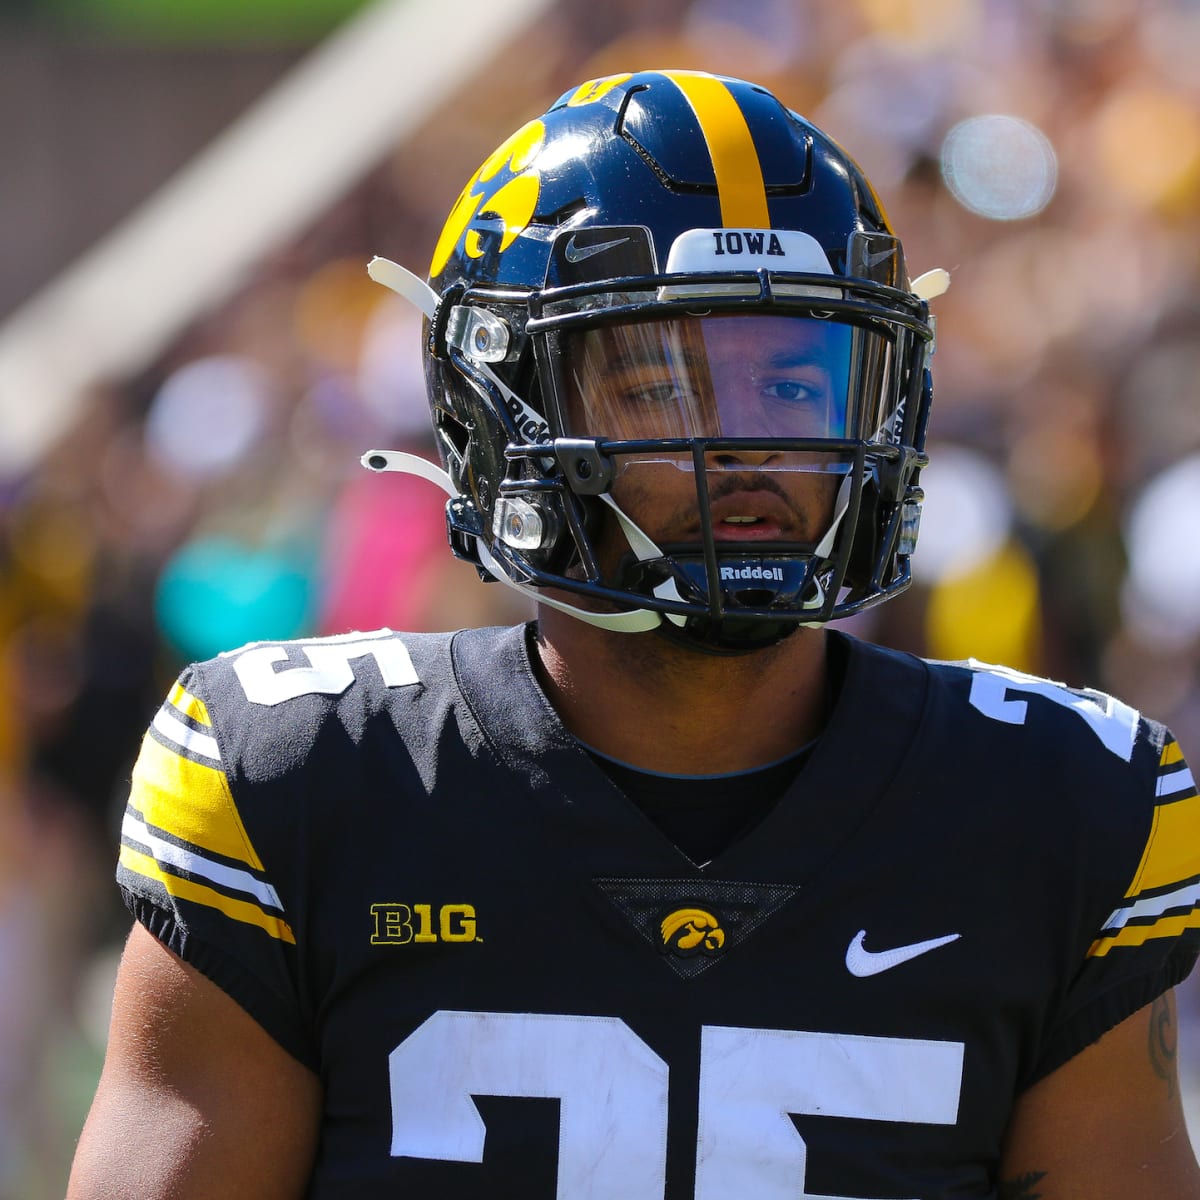 Iowa Football: A look at the Hawkeyes' helmets through the years